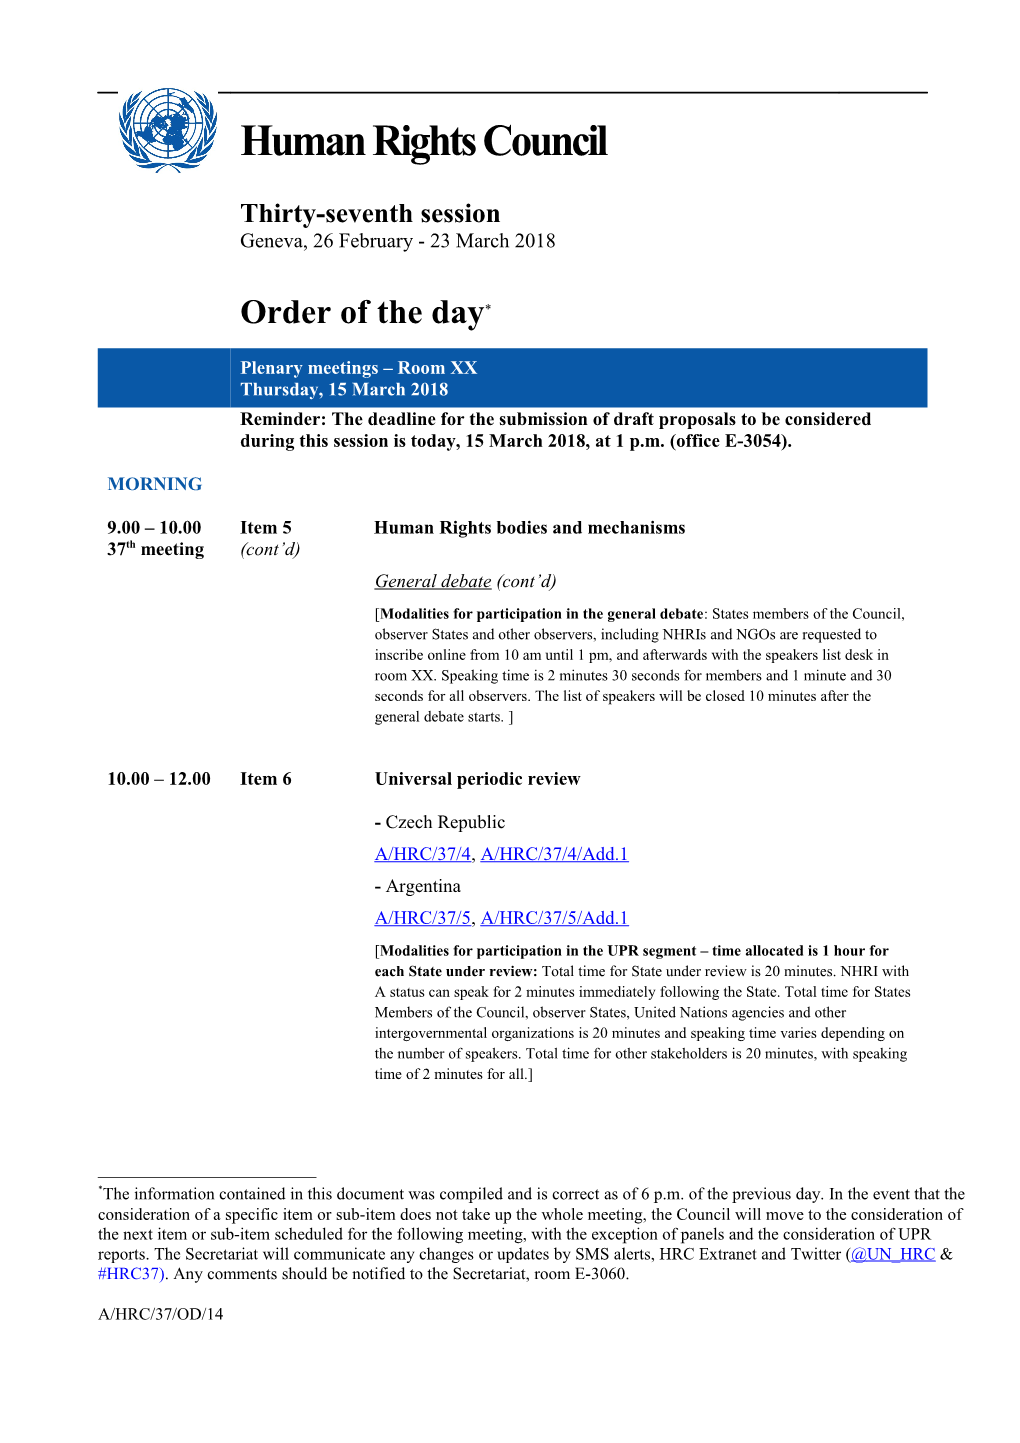 Order of the Day, Thursday 15 March 2018